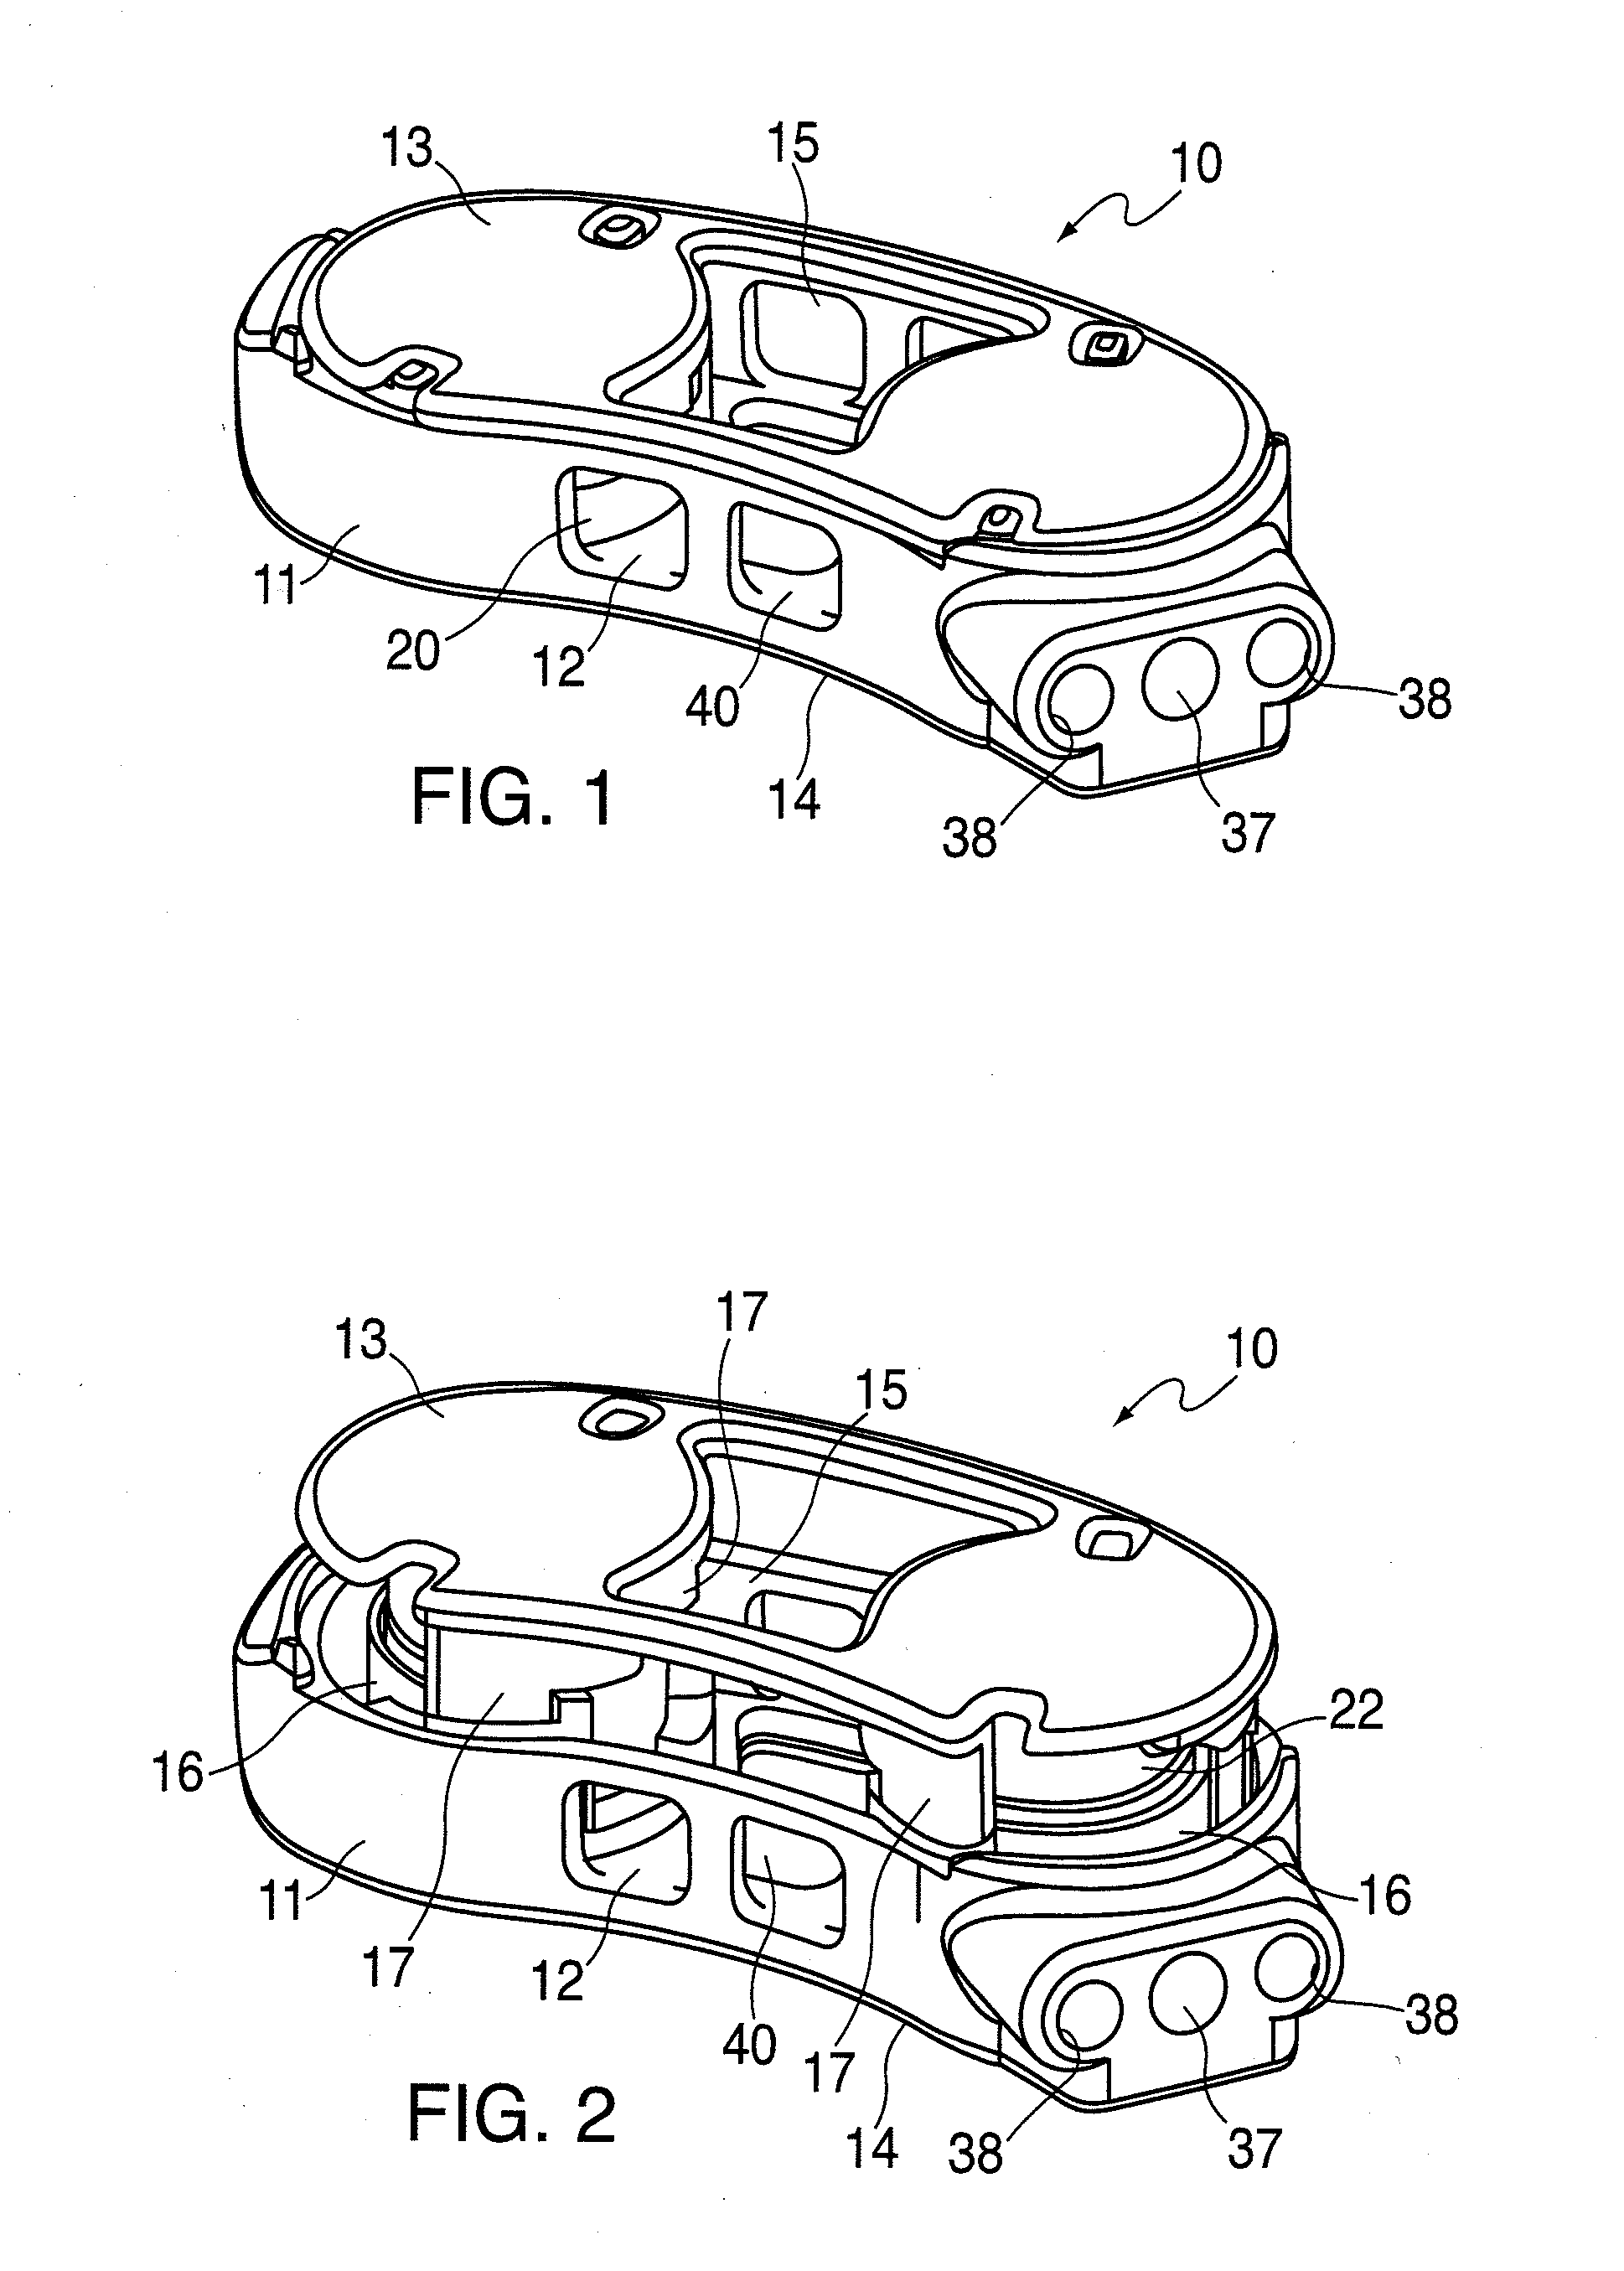 Adjustable Distraction Cage With Linked Locking Mechanisms